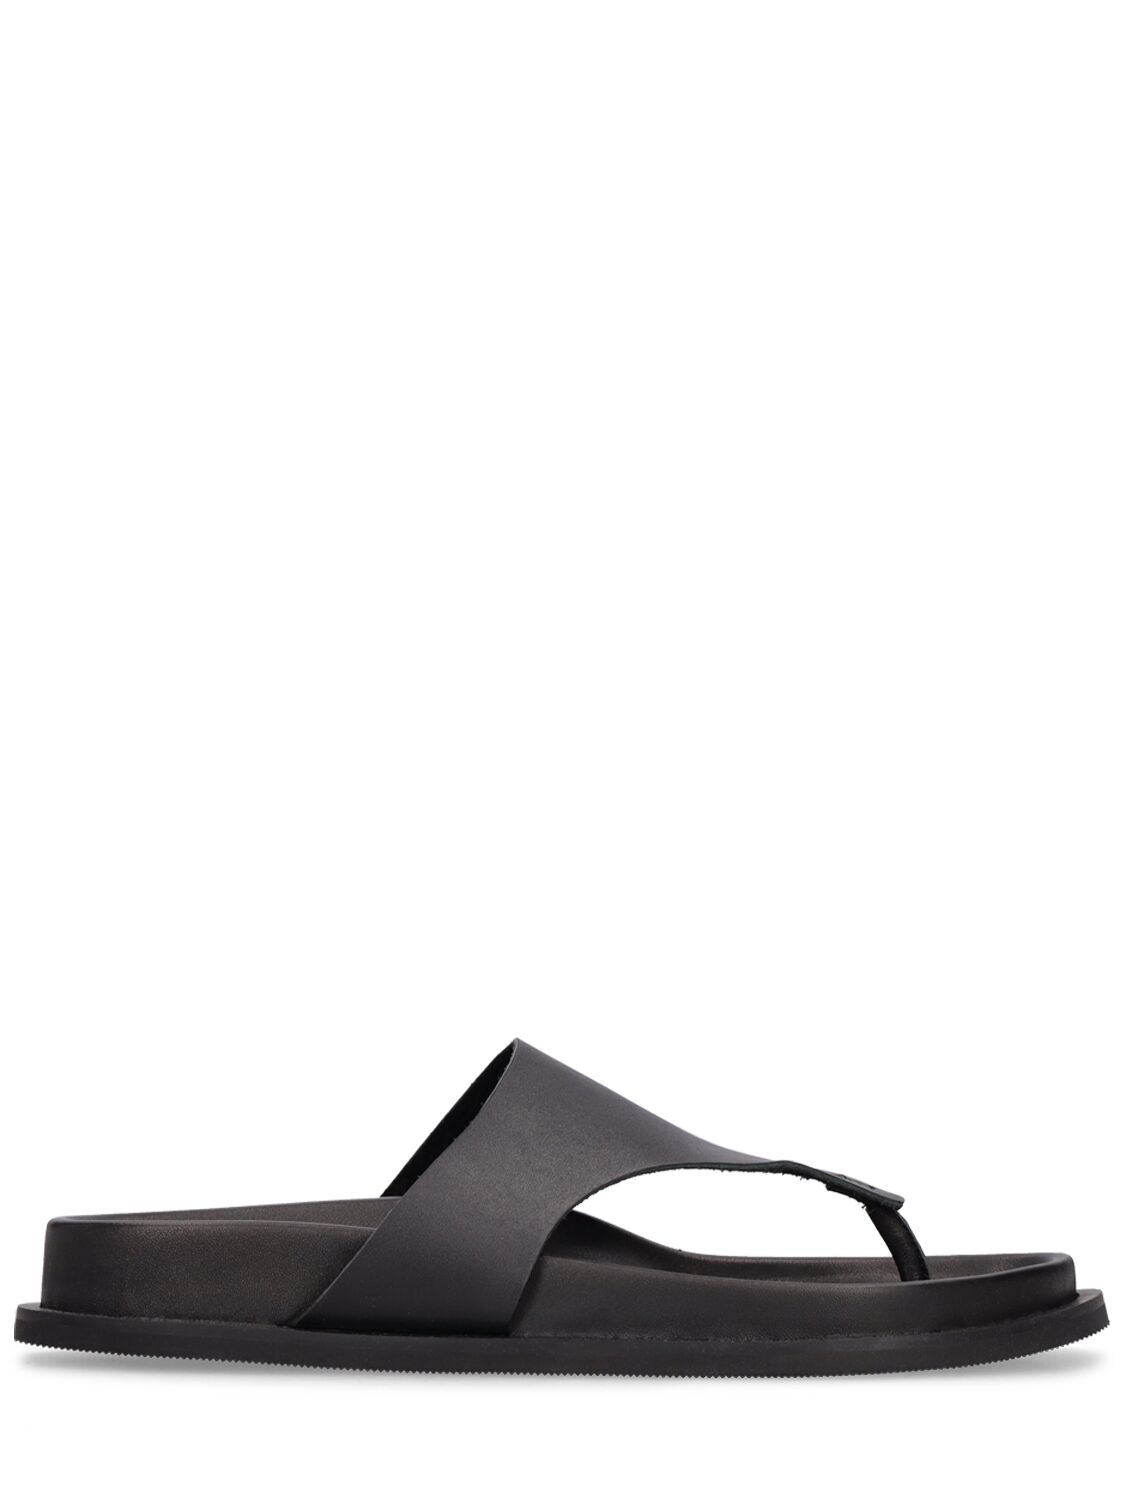 St.agni 30mm Minimal Leather Thong Sandals In Black